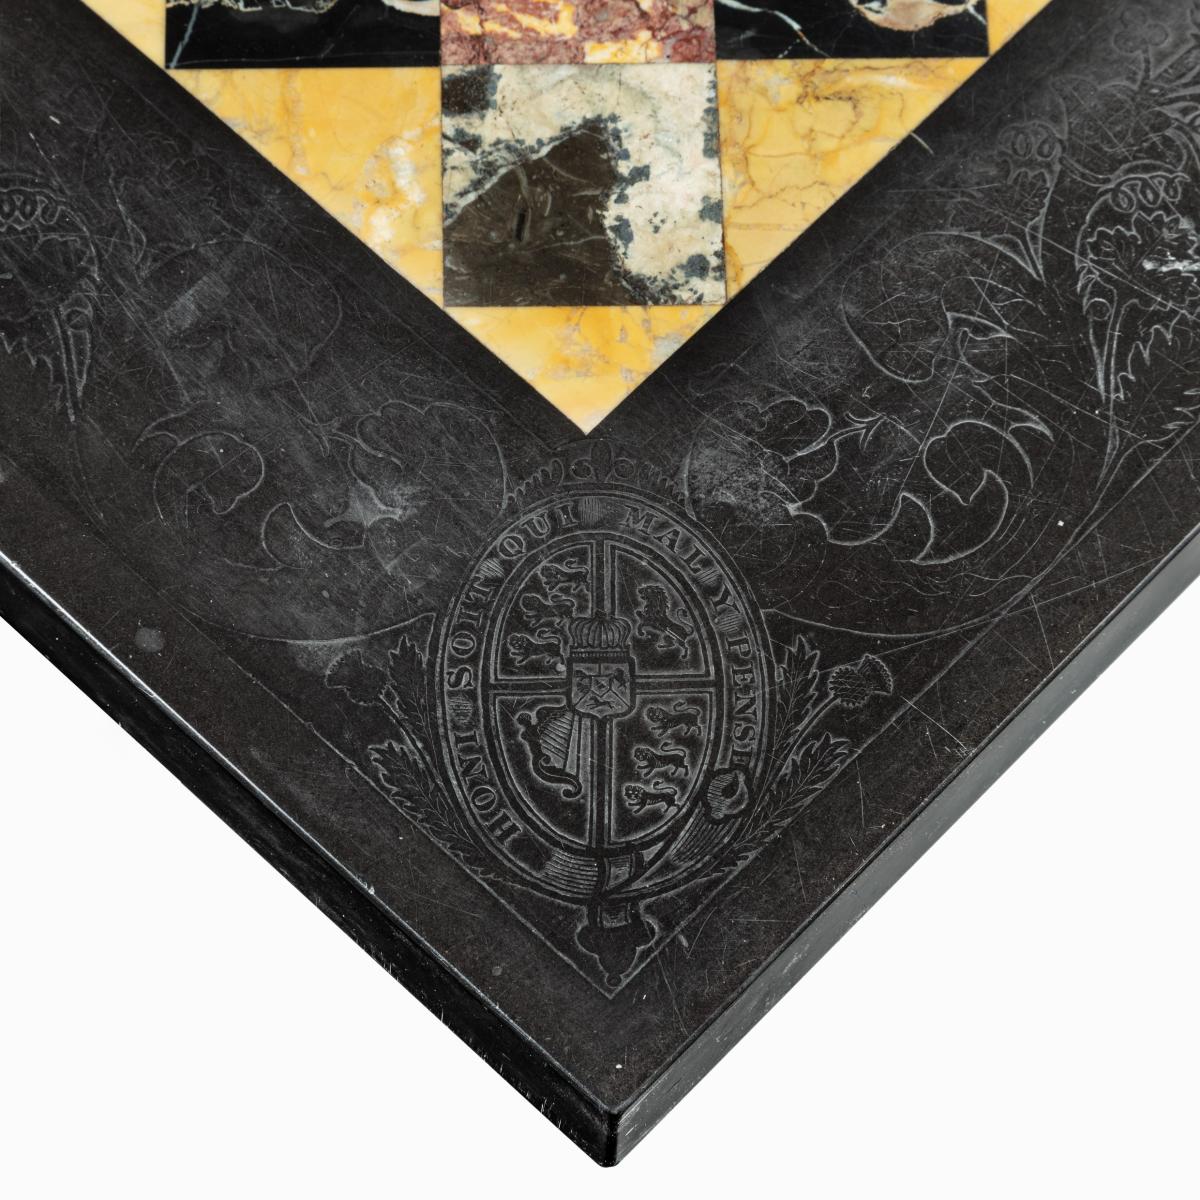 A rare and unusual Order of the Garter black marble table